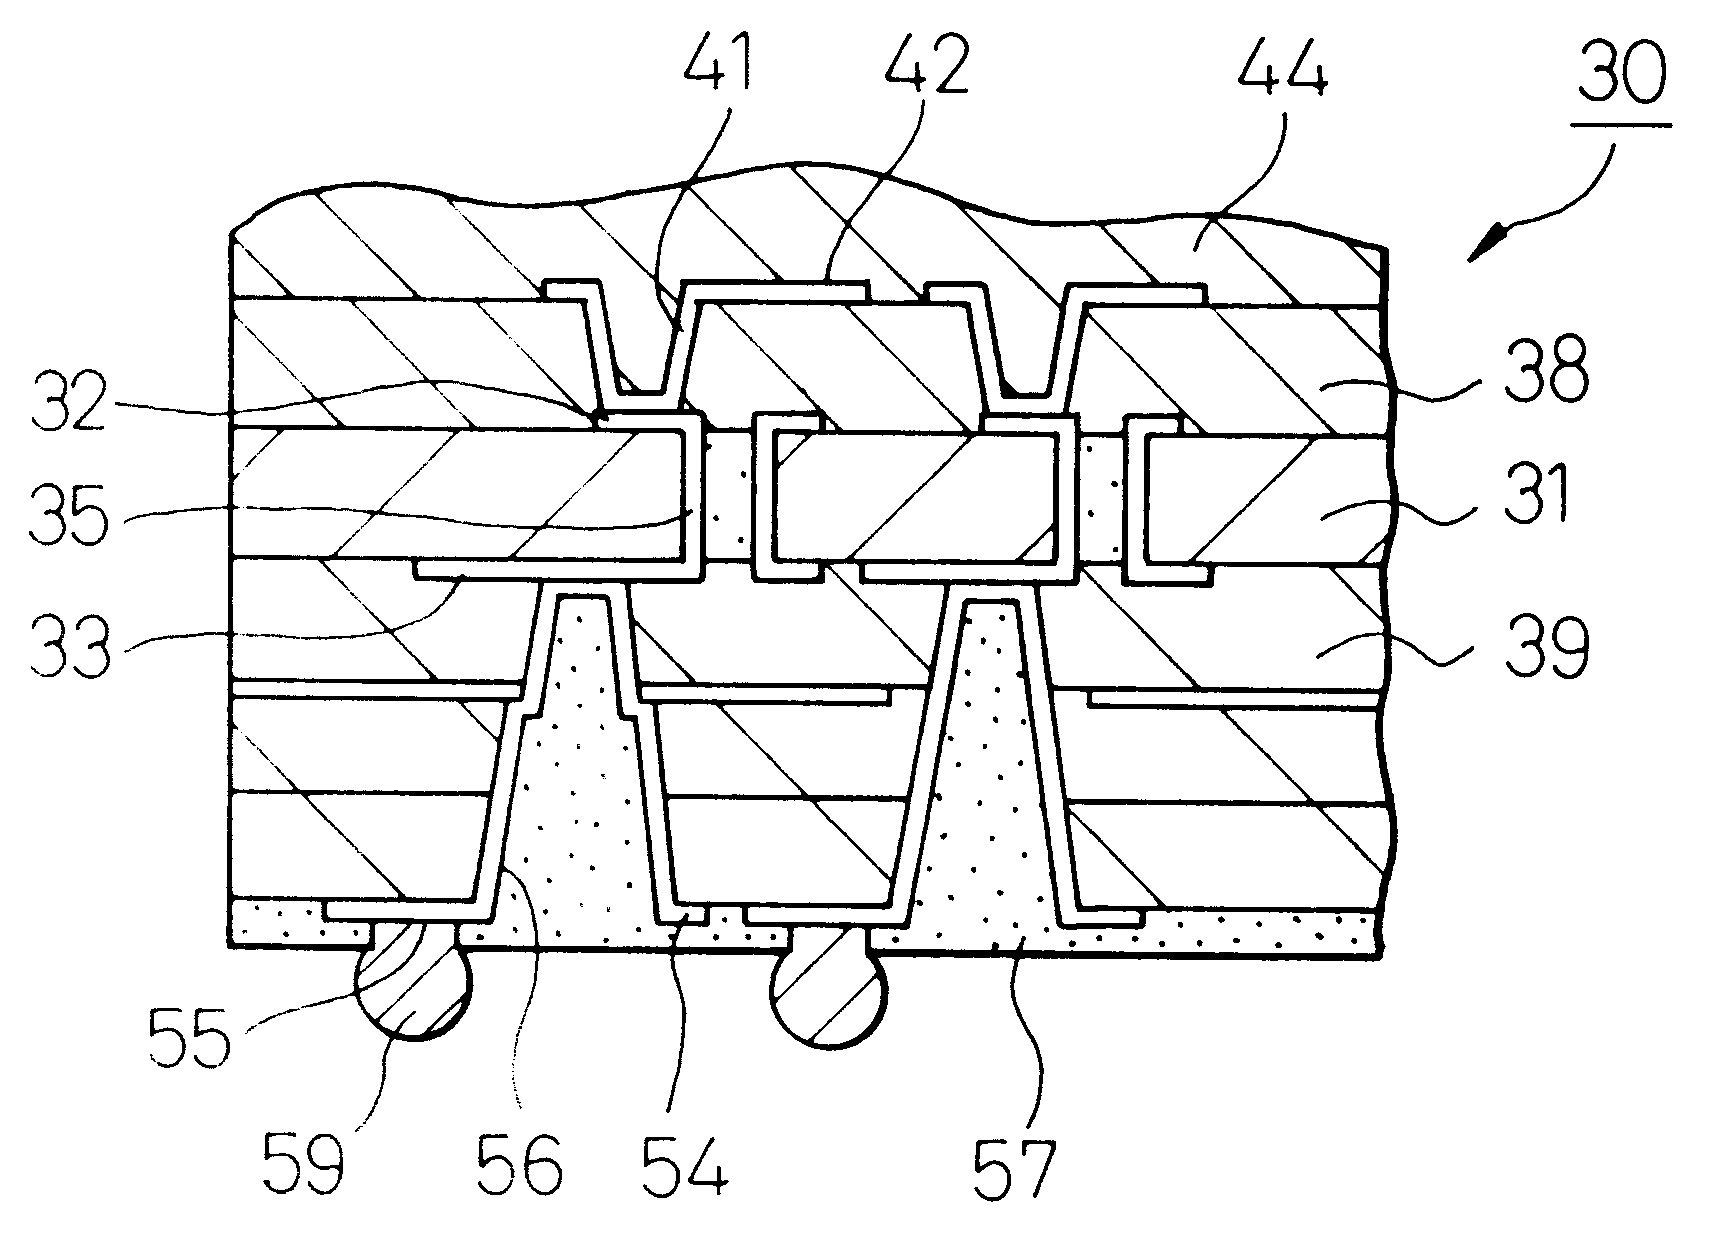 Build-up board package for semiconductor devices